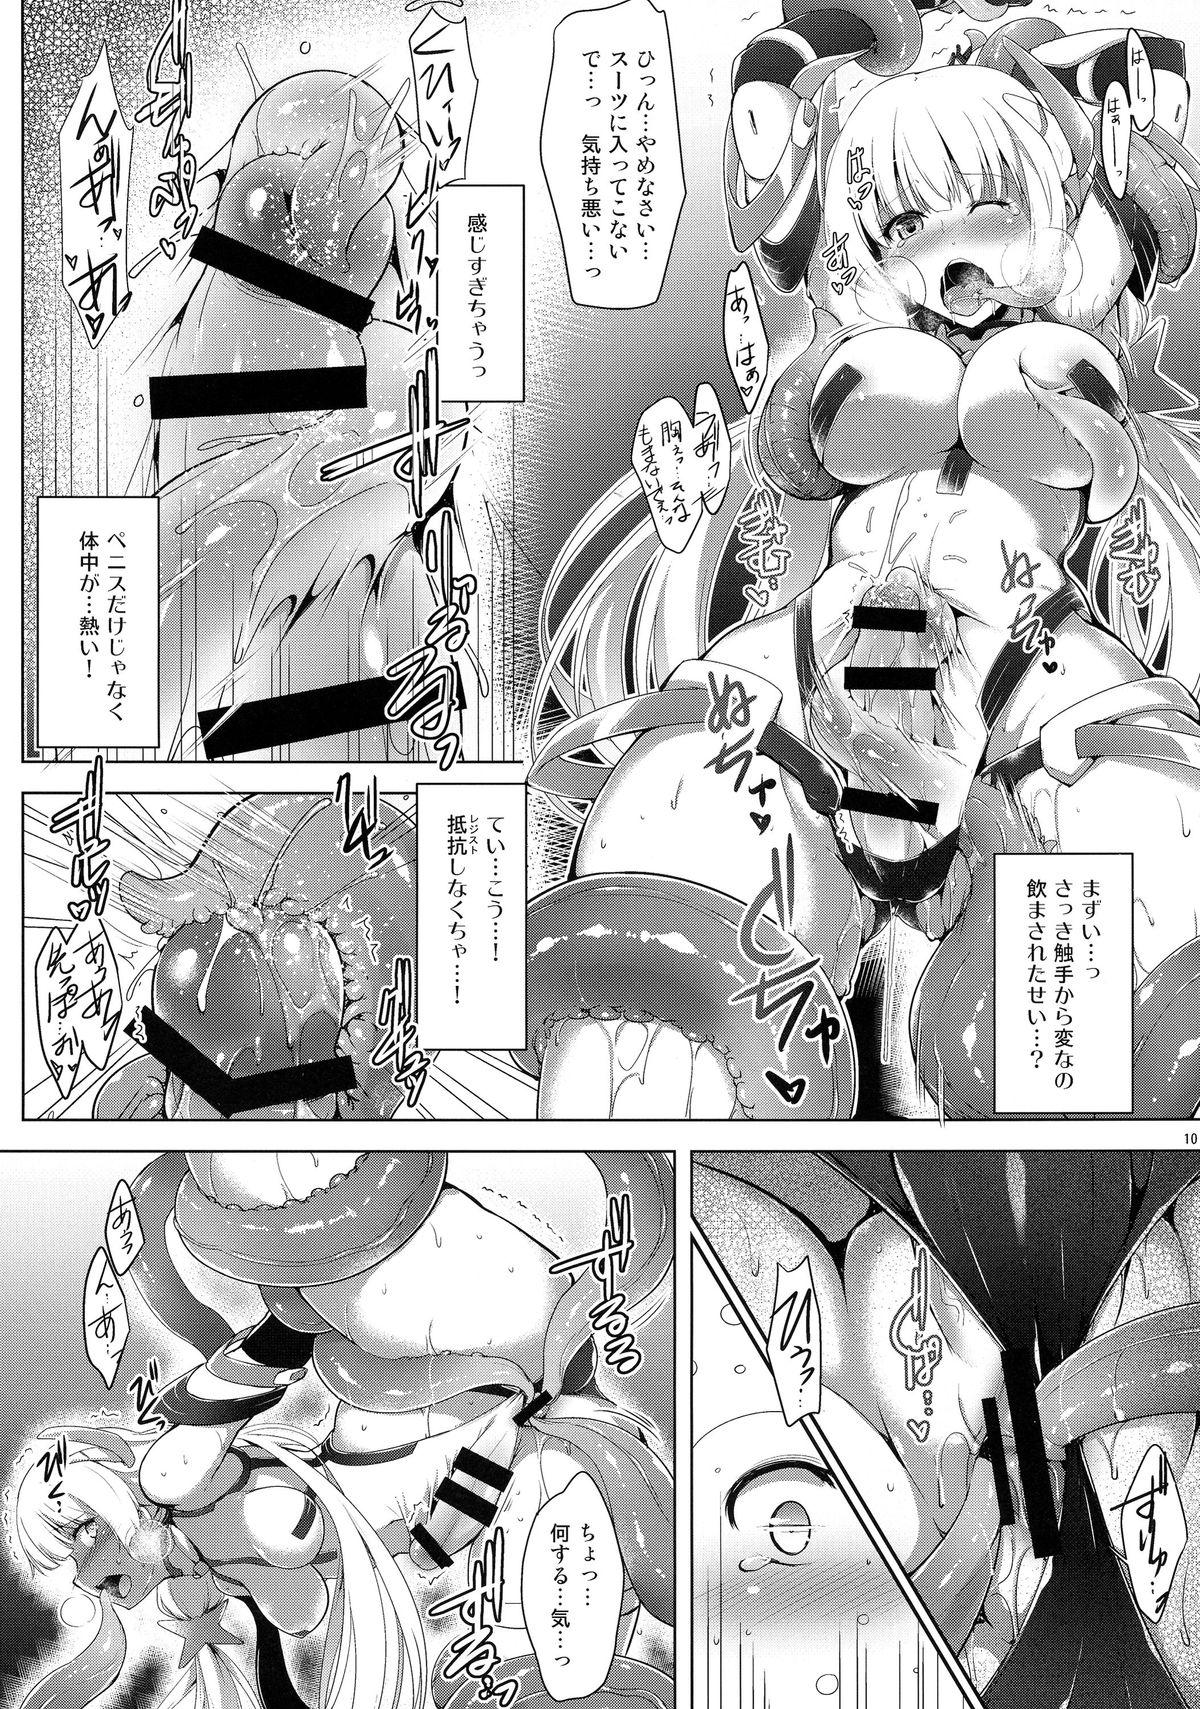 Muscle K.231 - Expelled from paradise Uncensored - Page 10